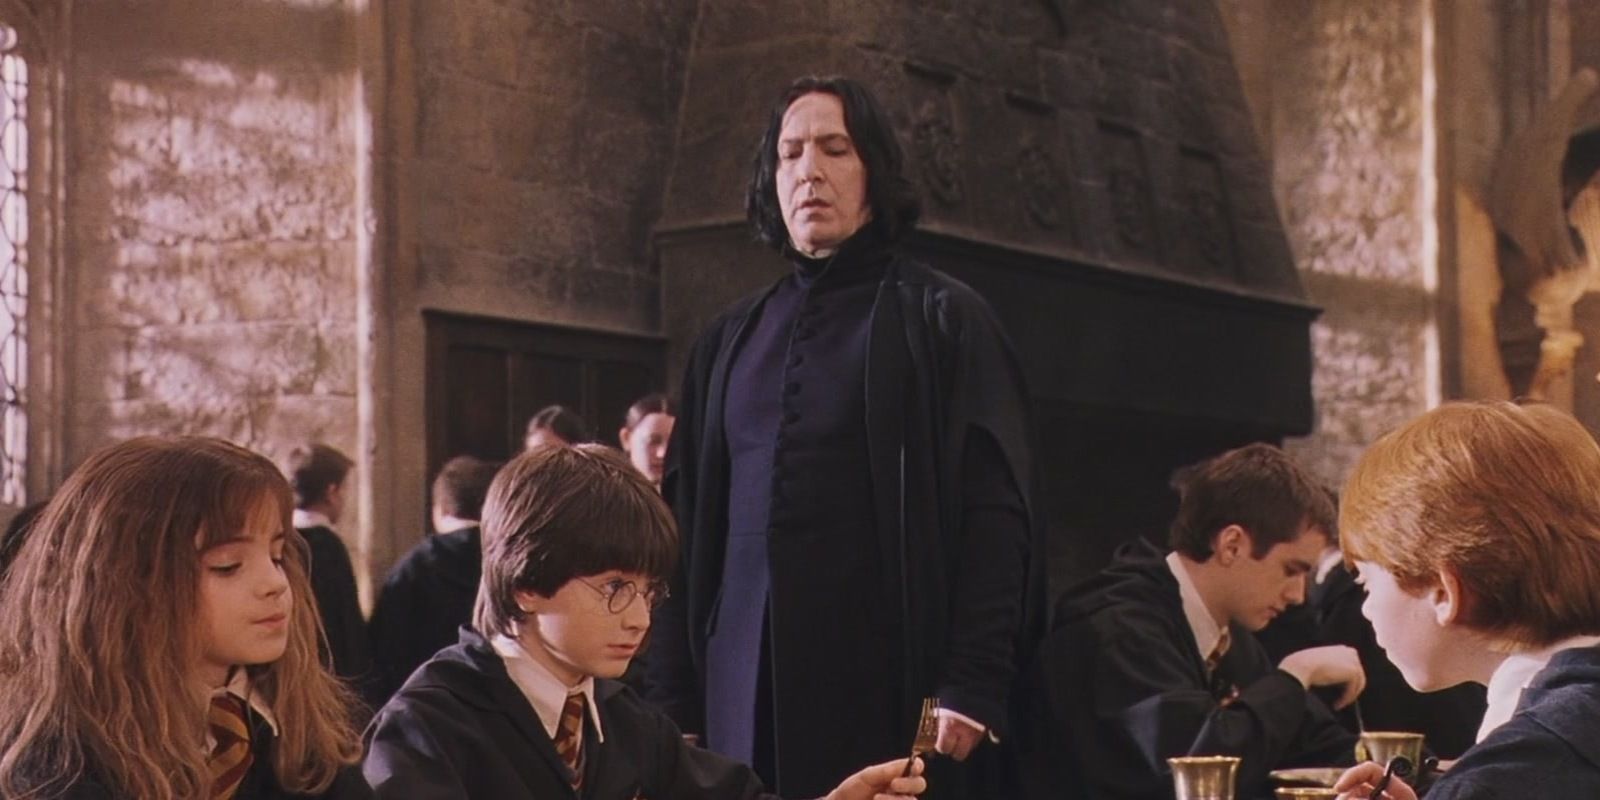 Harry, Hermione and Ron in the Great Hall with Snape looking at Harry